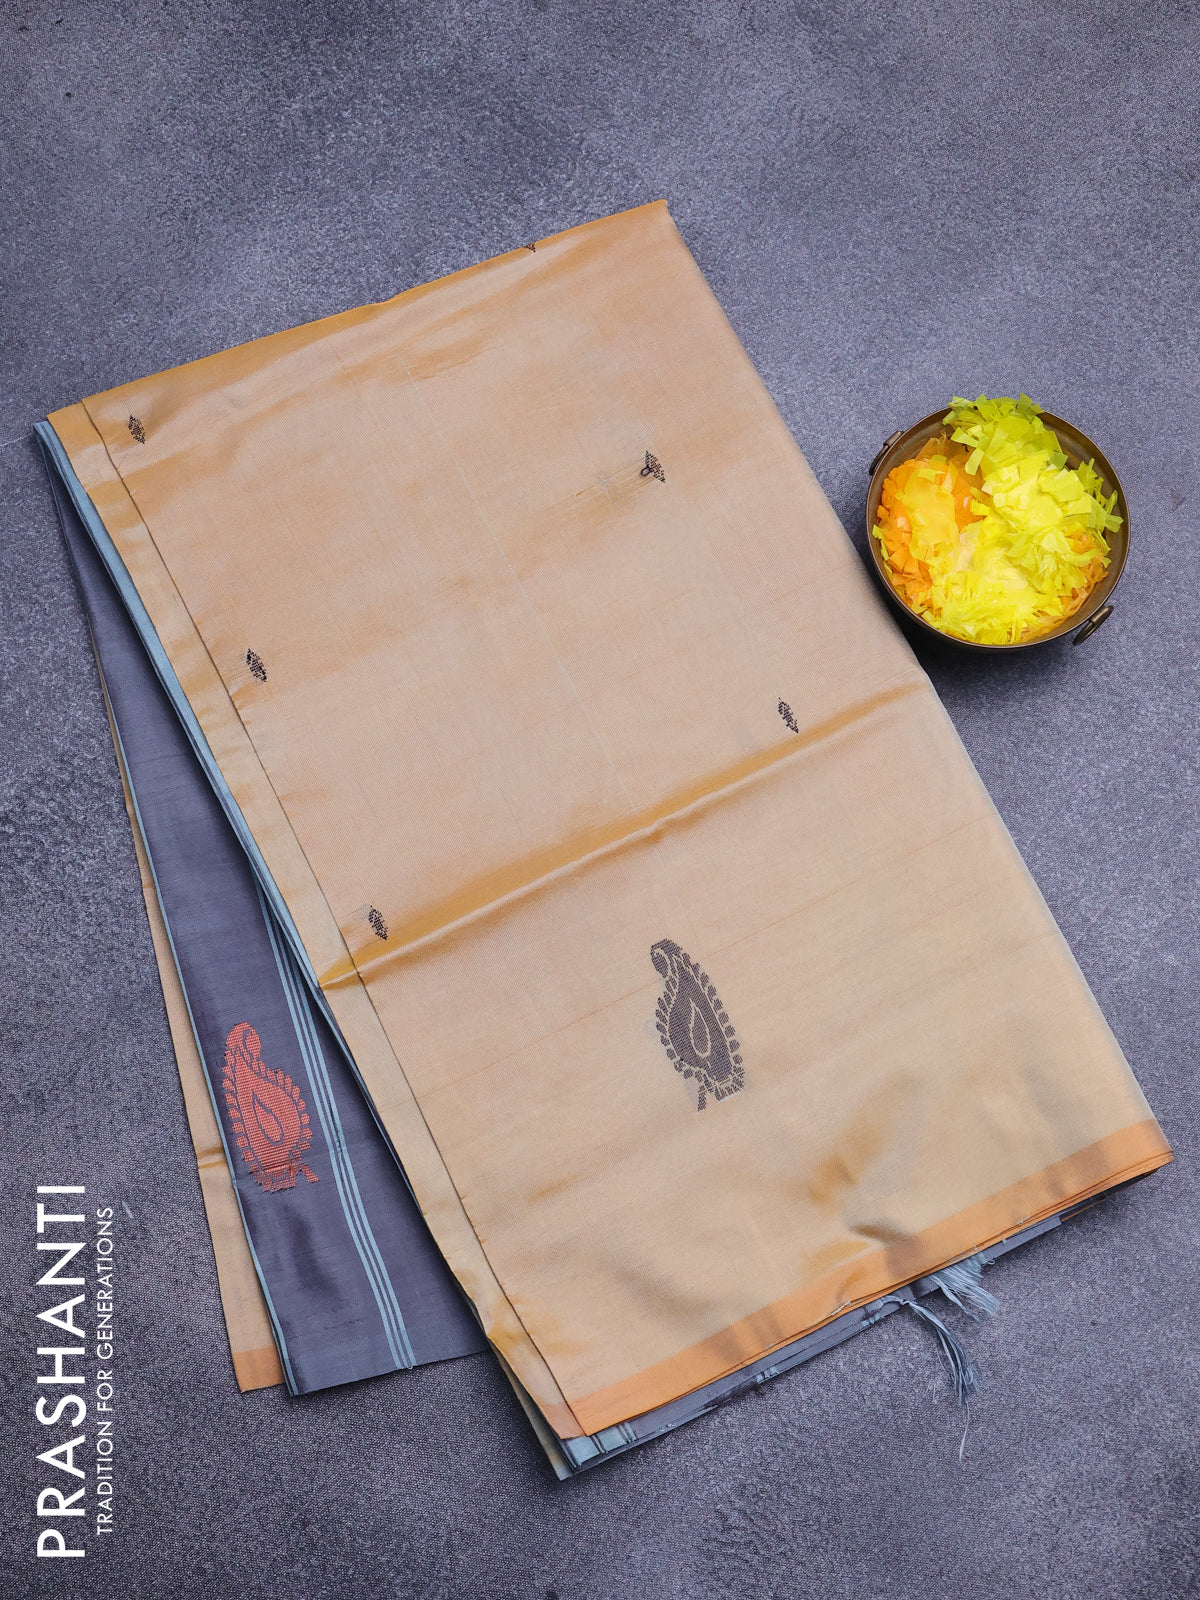 Banana pith saree pale orange shad and grey with thread woven buttas in borderless style